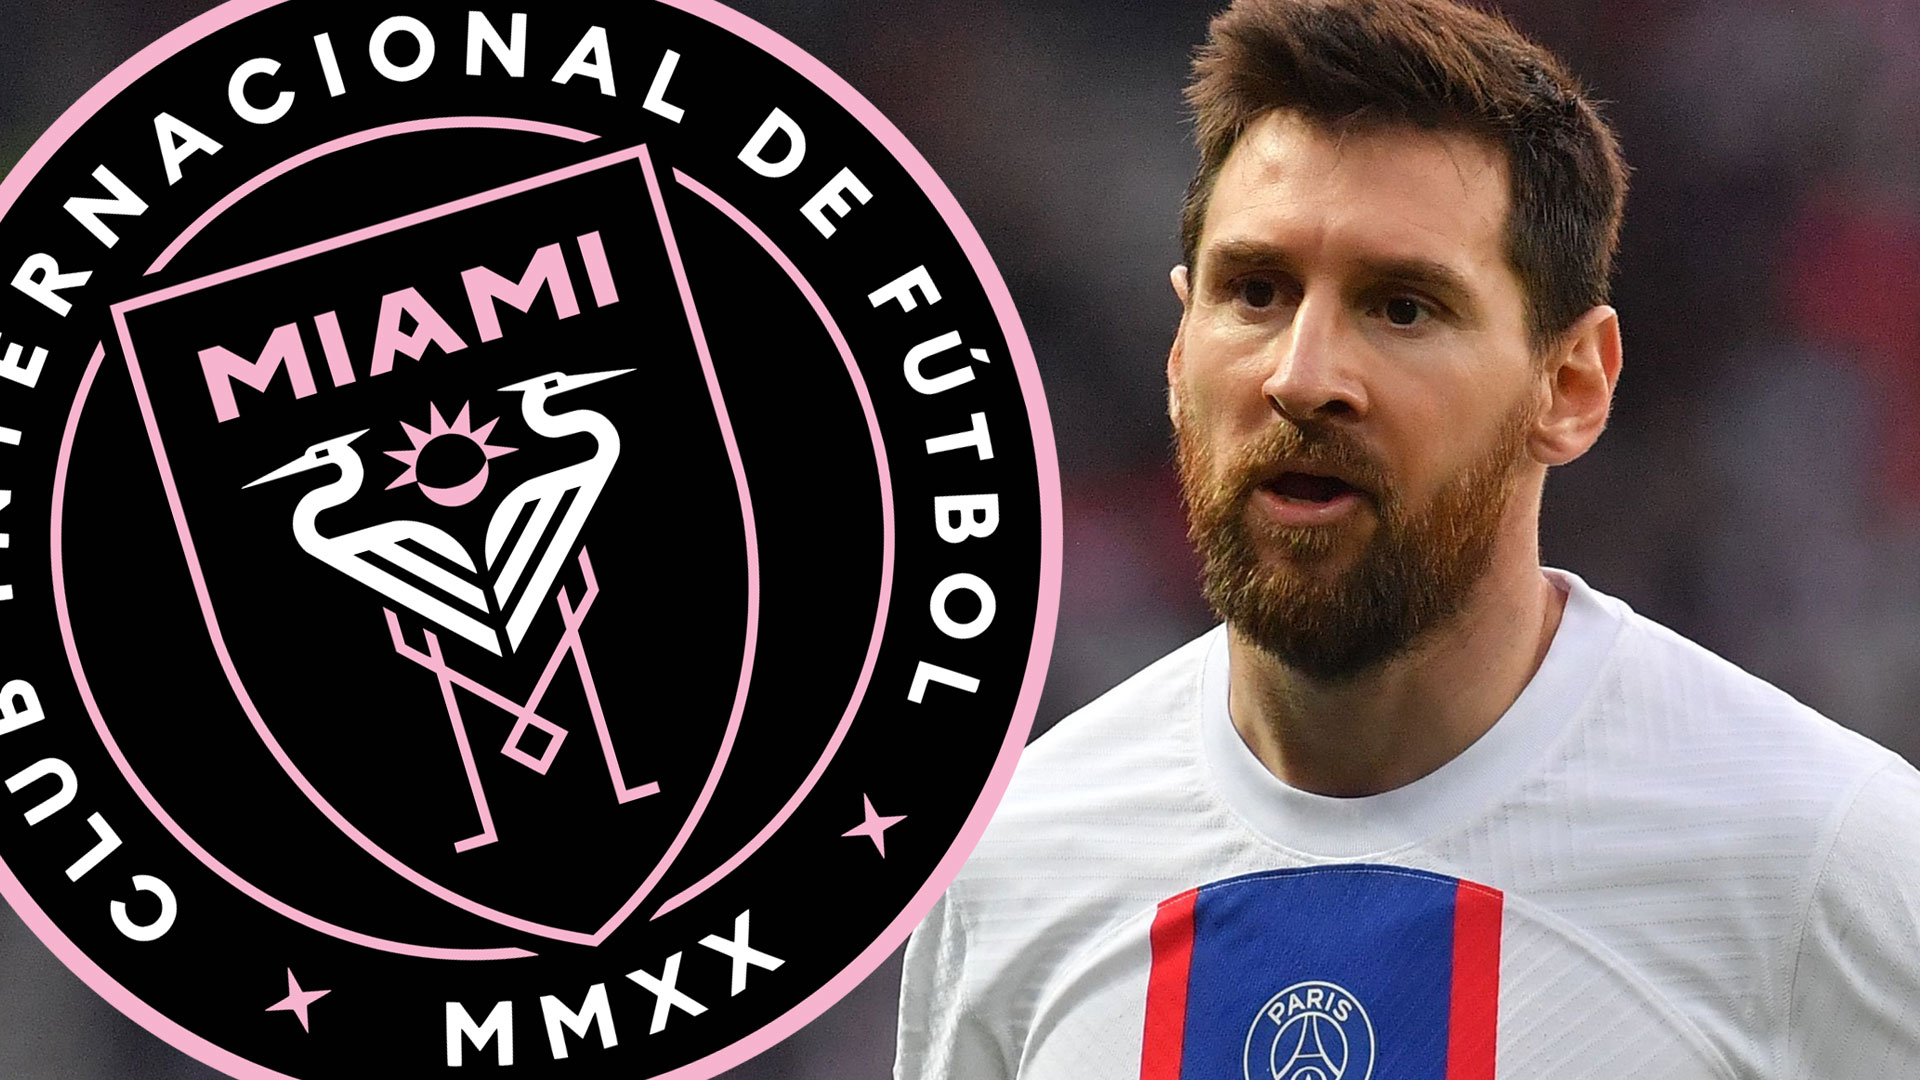 Fans are all saying the same thing as Argentina World Cup icon Lionel Messi is set to join Inter Miami in shock transfer